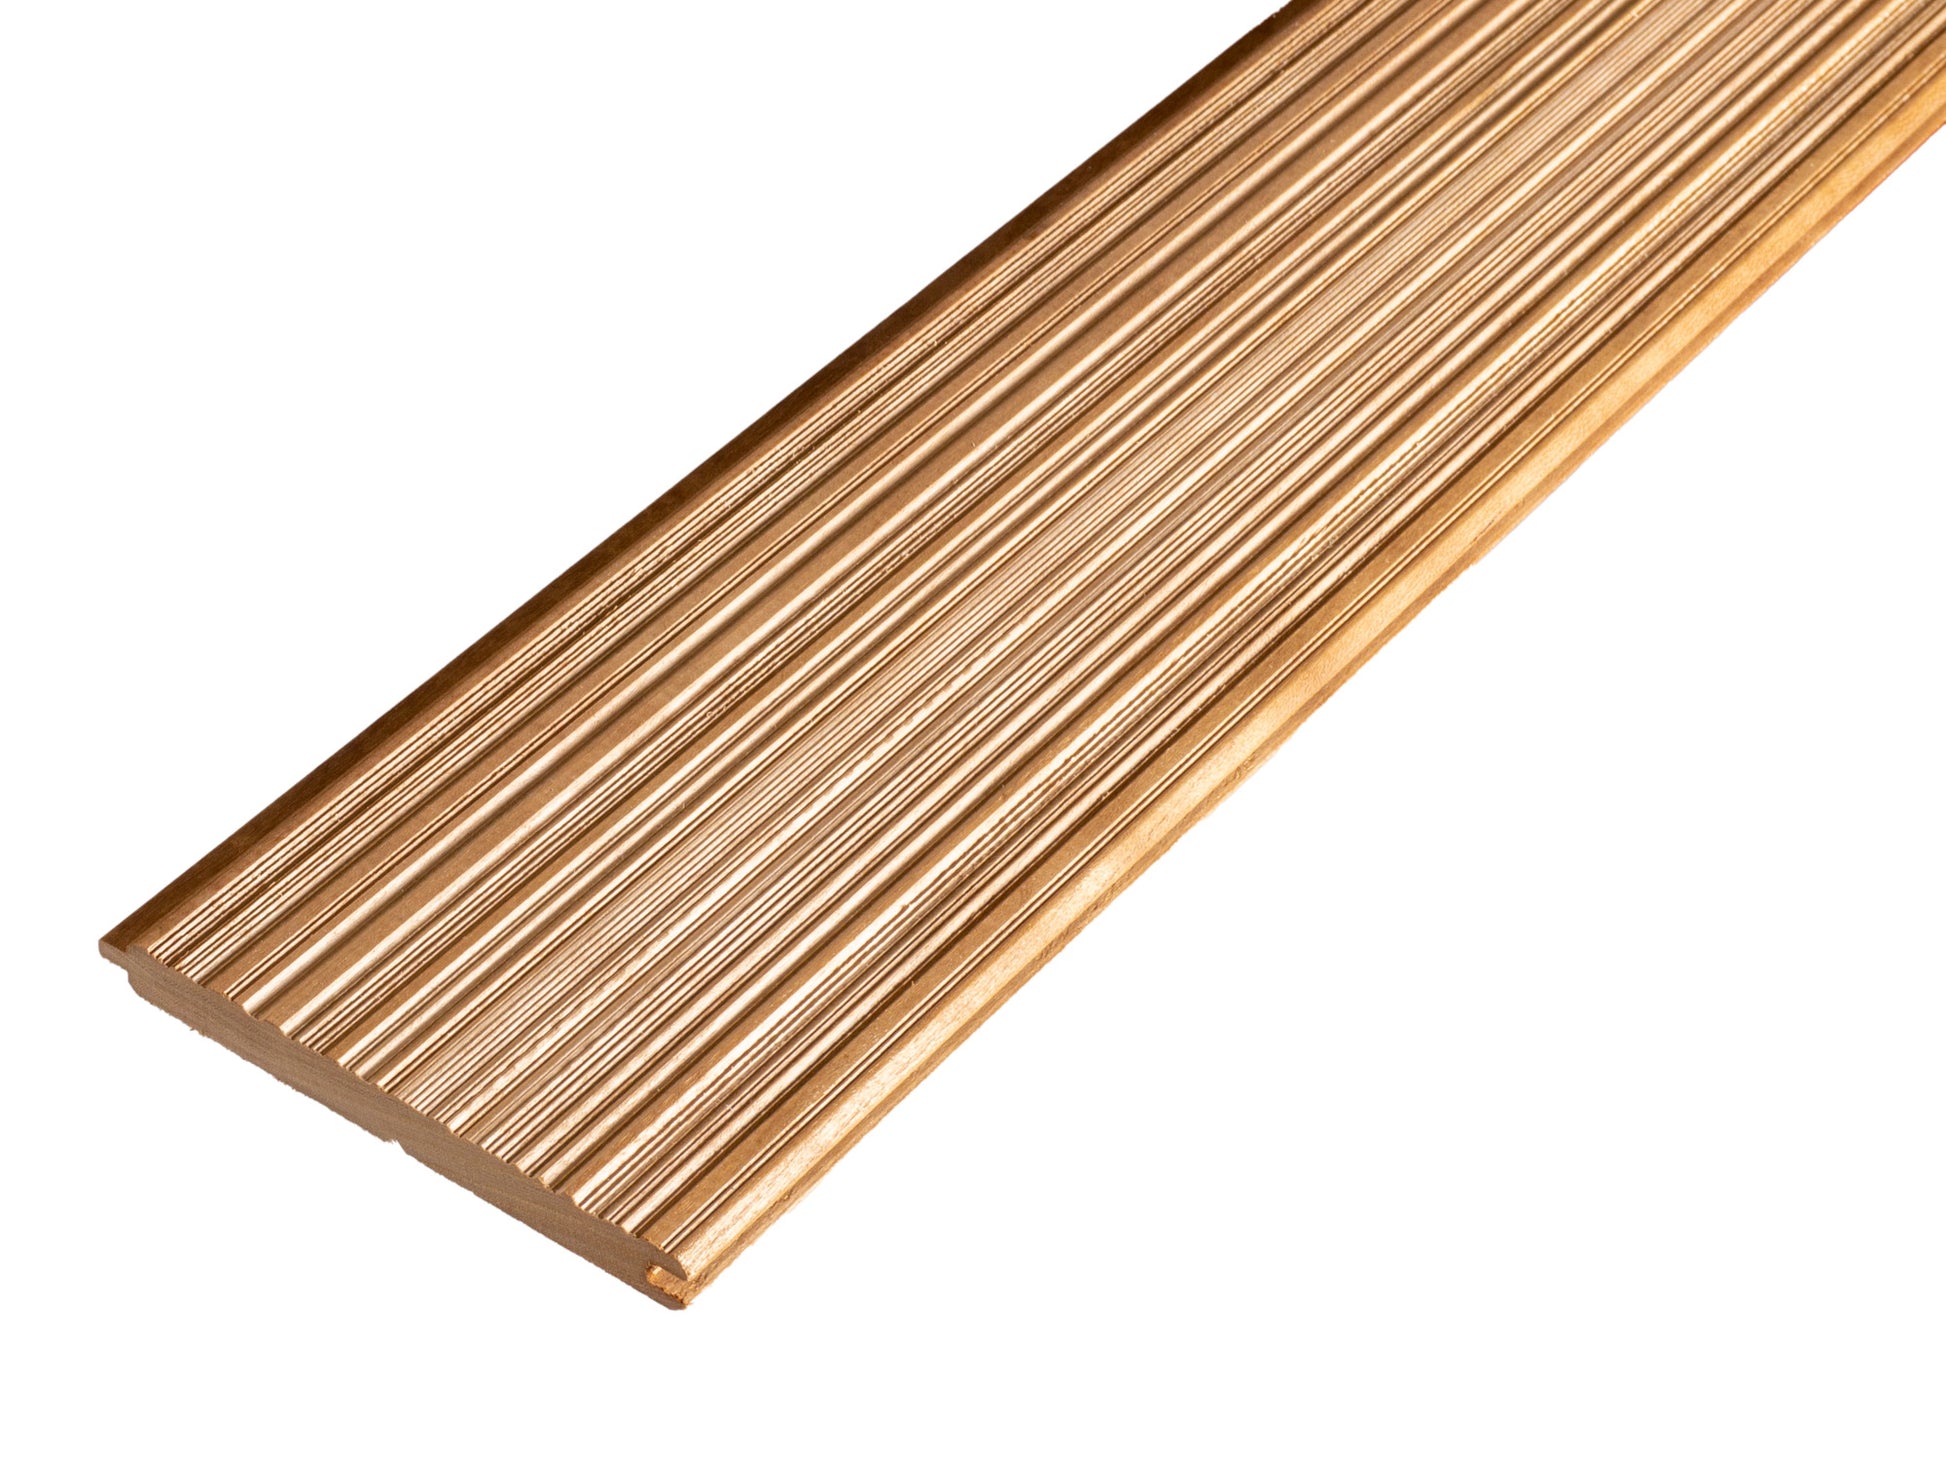 Close up of Weldtex tongue & groove cherry hardwood plank consisting of a combed, striated, brushed wood appearance common in mid-century modern homes and design